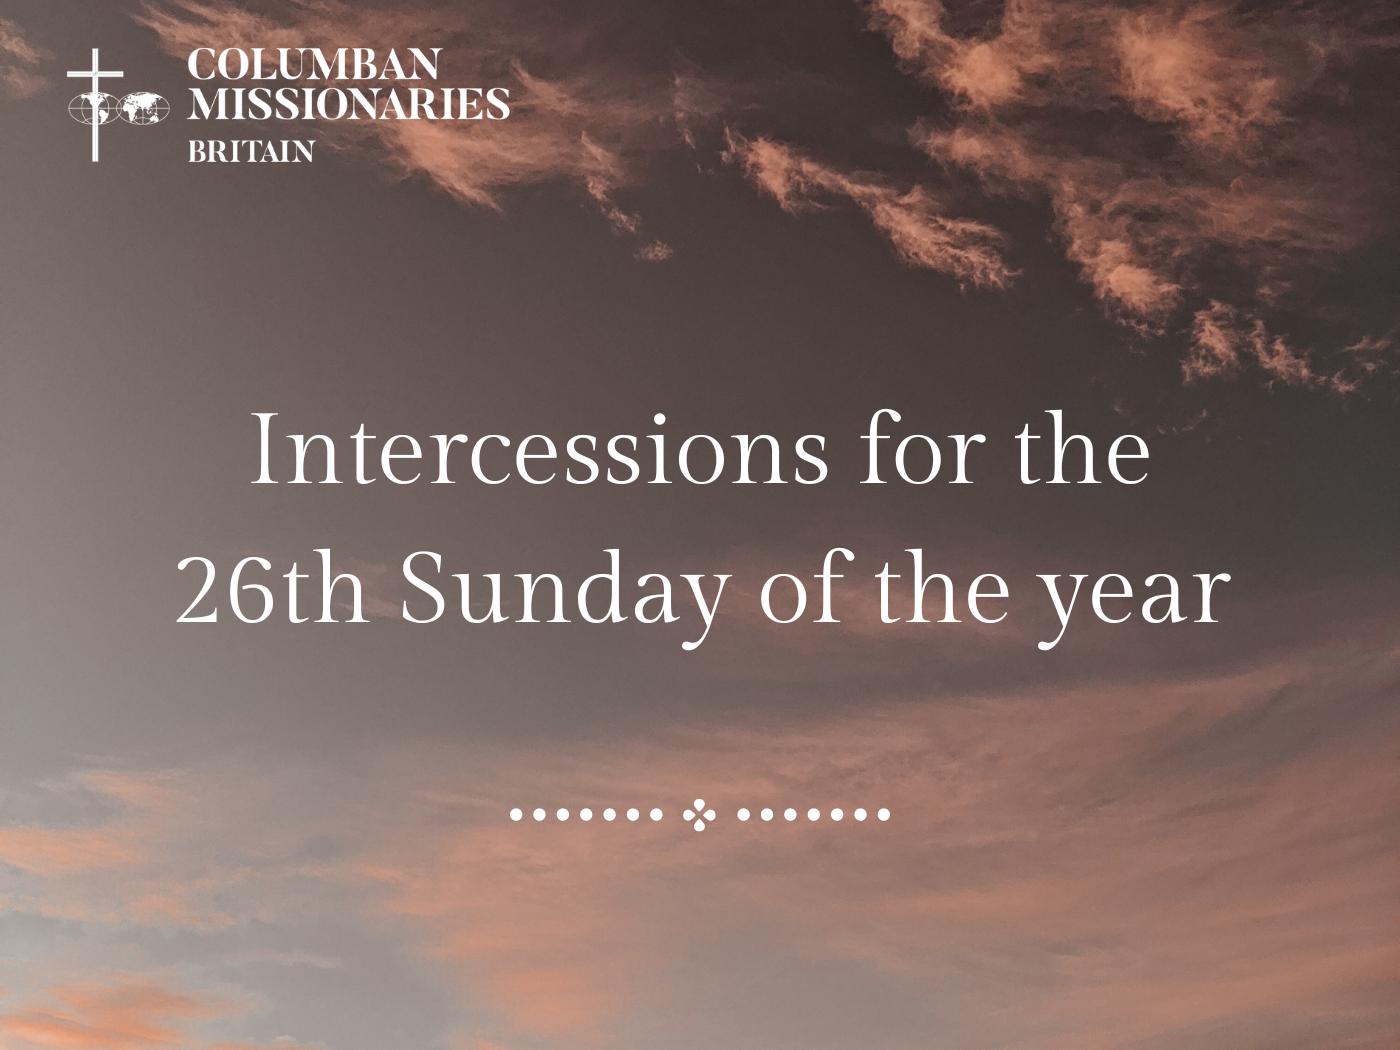 Download prayers of intercession for the 26th Sunday of the year